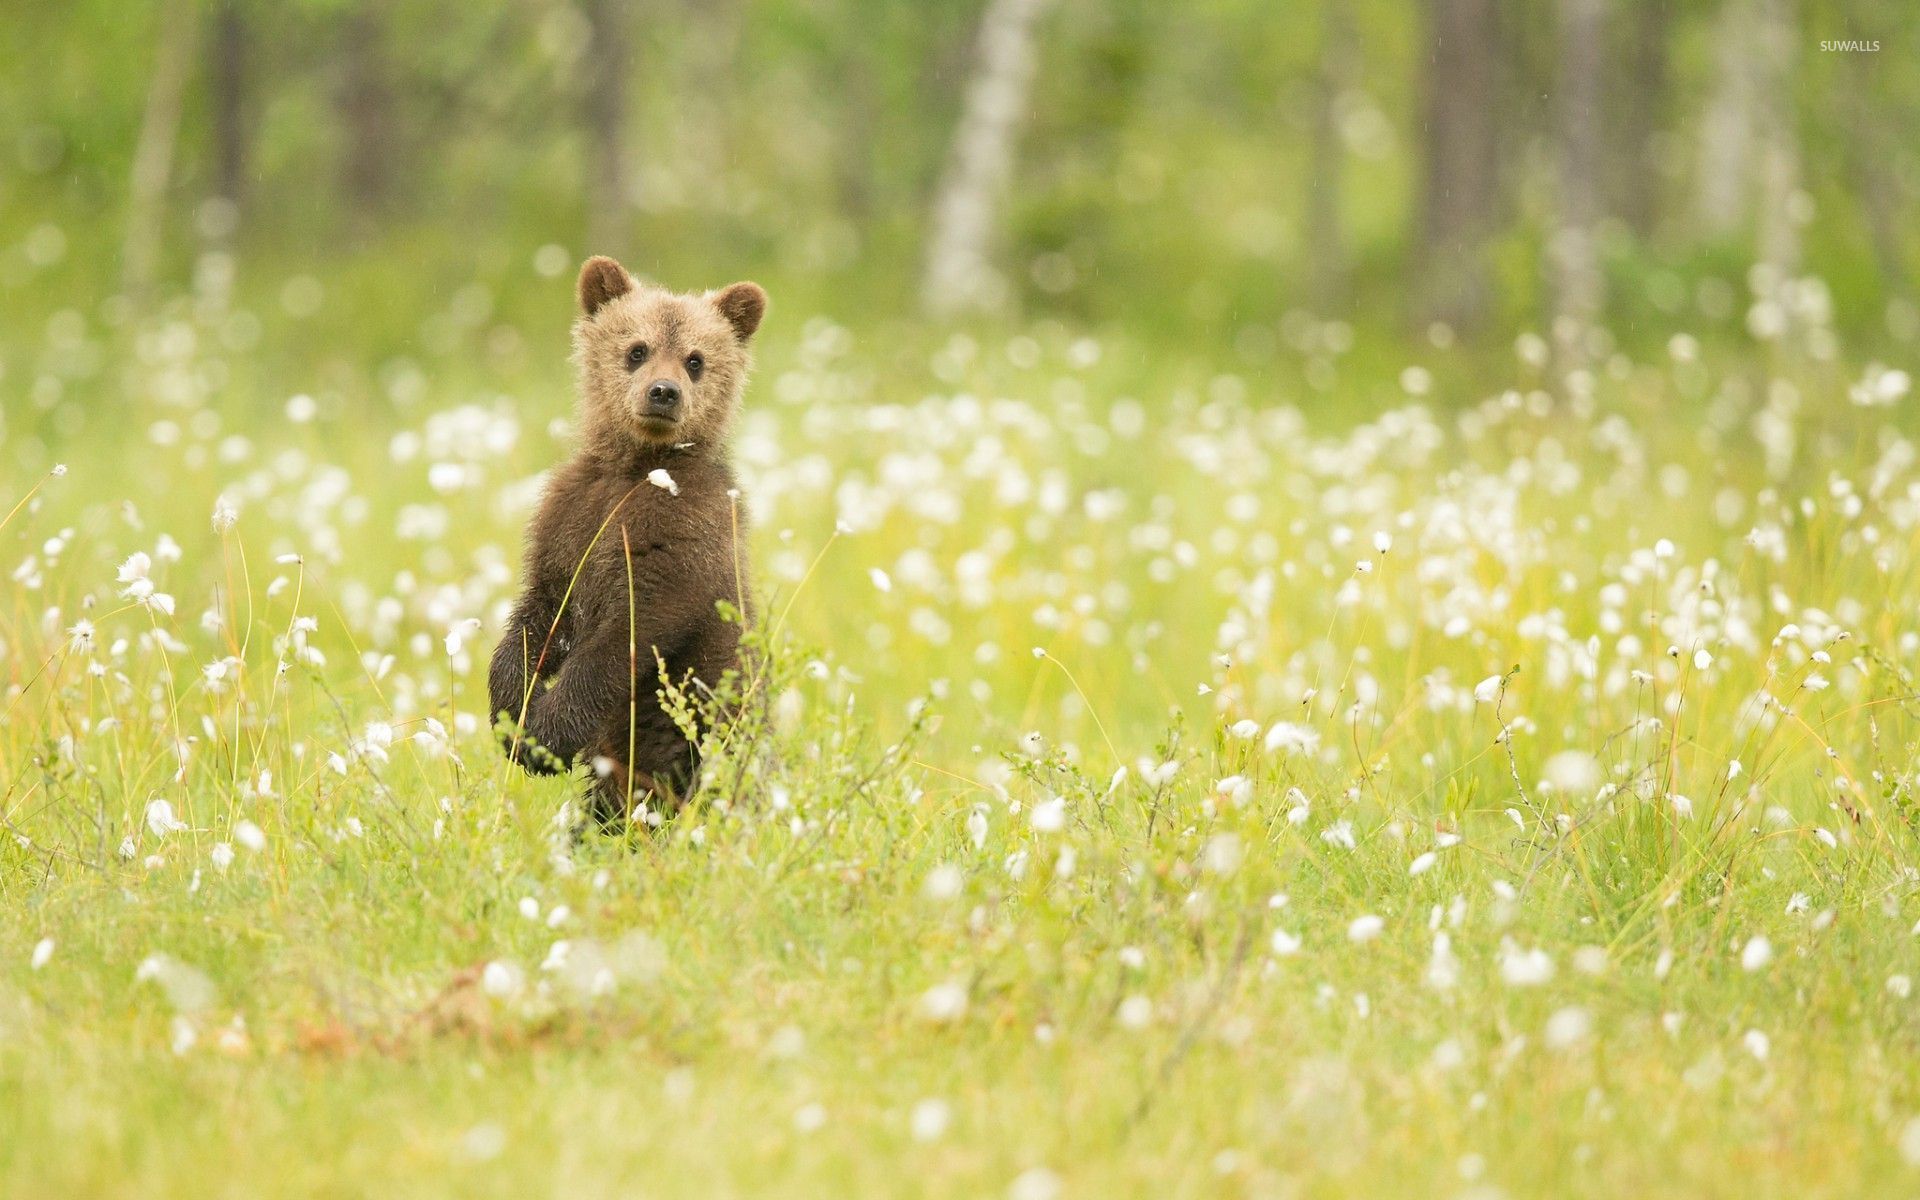 Adorable bear cub in the grass wallpaper - Animal wallpapers - #53073